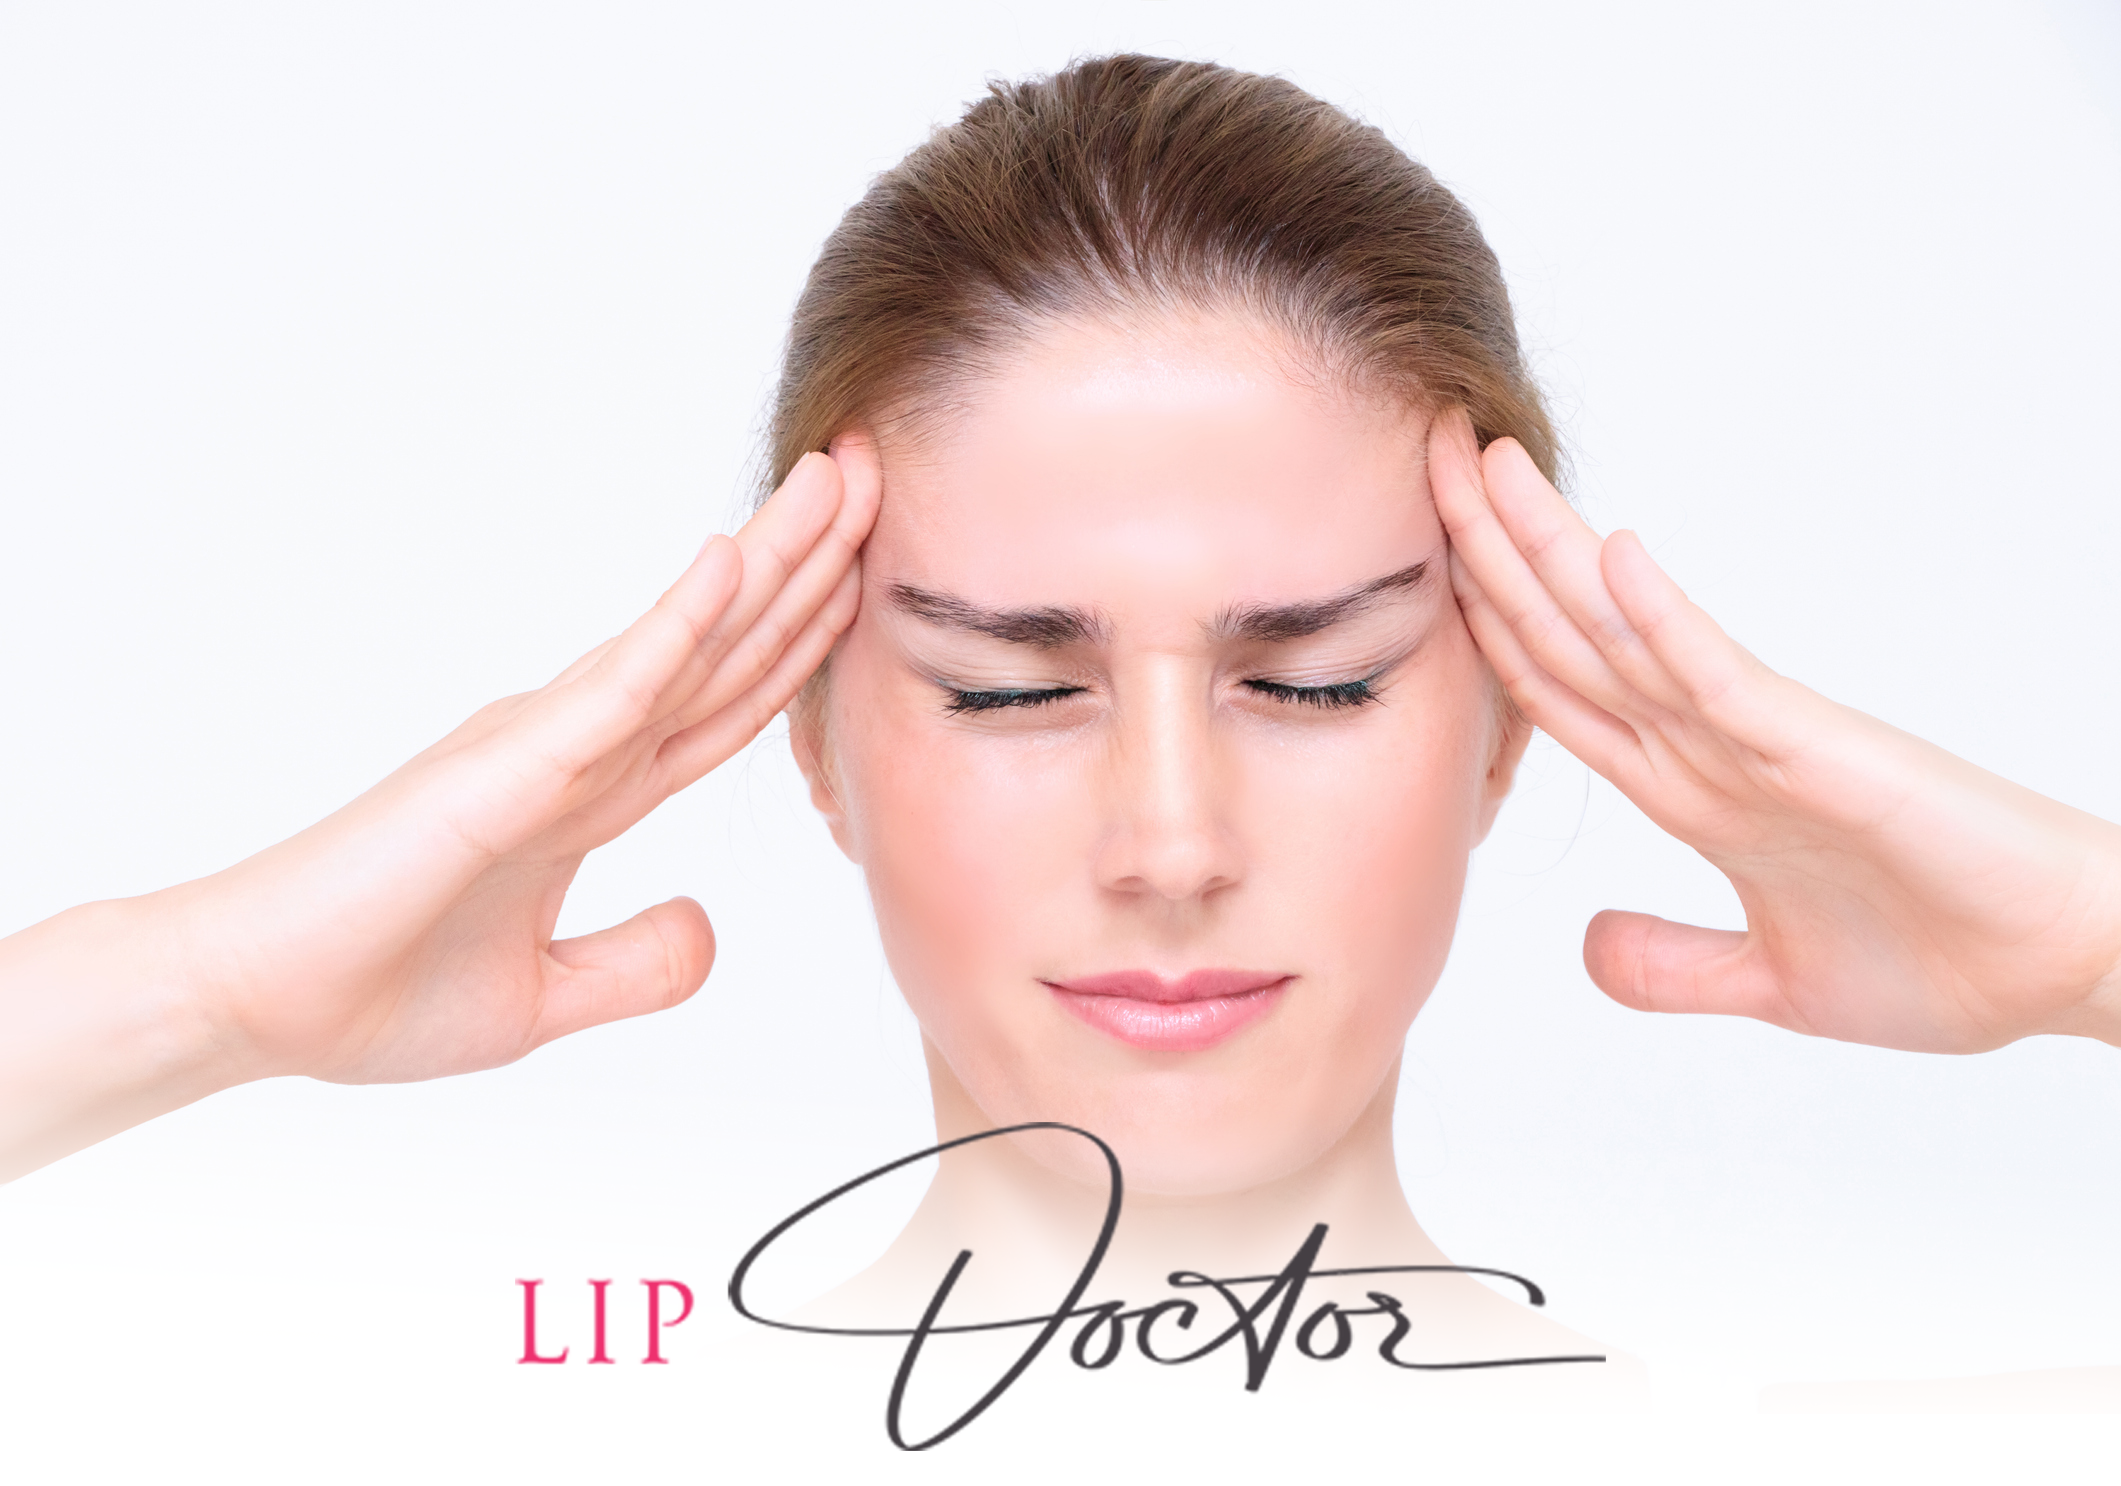 Using Botox injection to patient suffering from chronic migraines, in a clinical setting